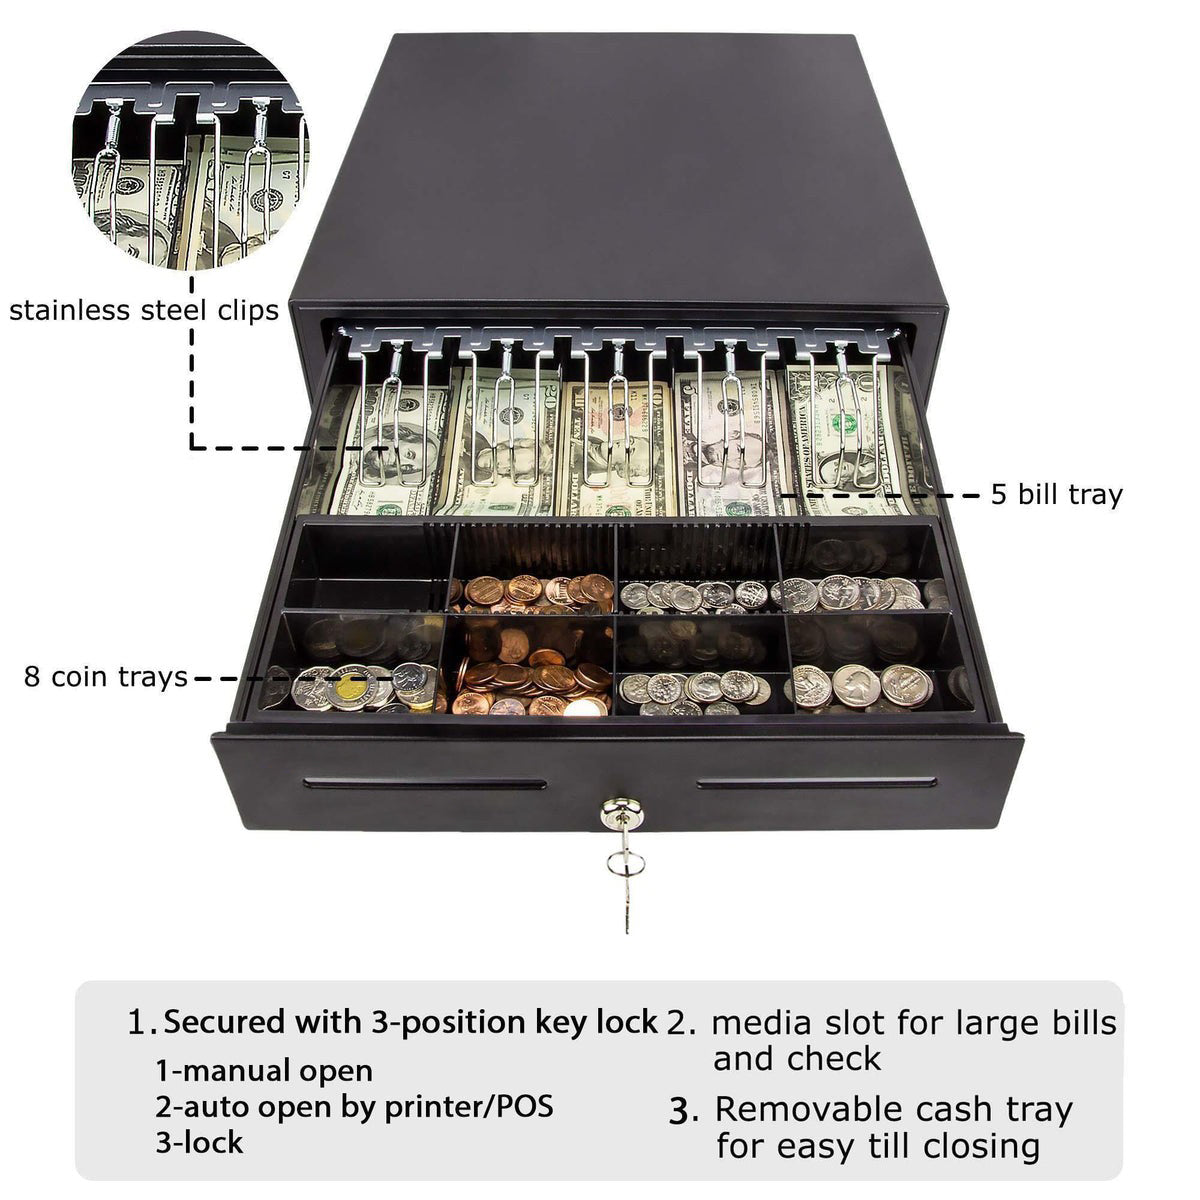 LogicOwl OJ-425 Heavy Duty Metal Cash Register Drawer Box XL with 5 Bills 8 Coins Trays, 2 Keys, RJ11 Interface Automatic Open for Grocery Store Shop Cashier Safety Money Cabinet